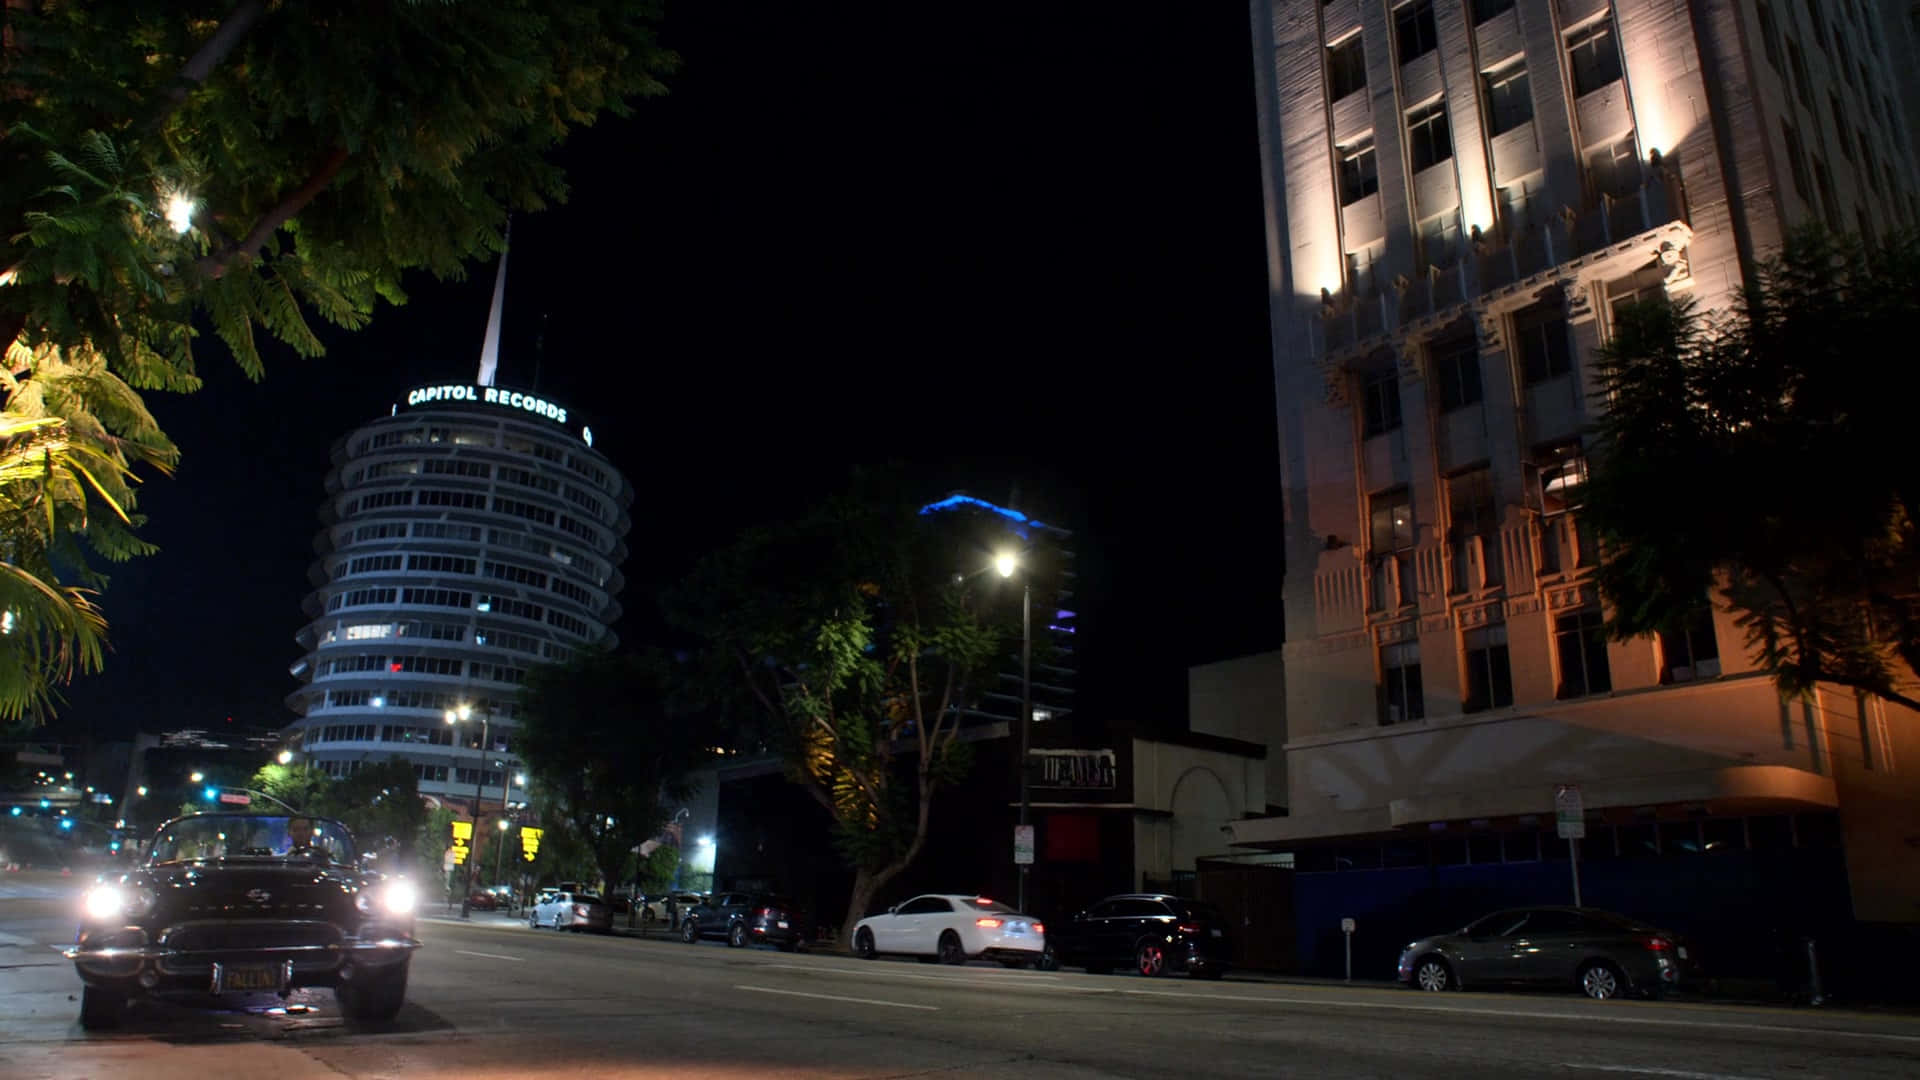 Nighttime Picture Of Capitol Records Building Wallpaper